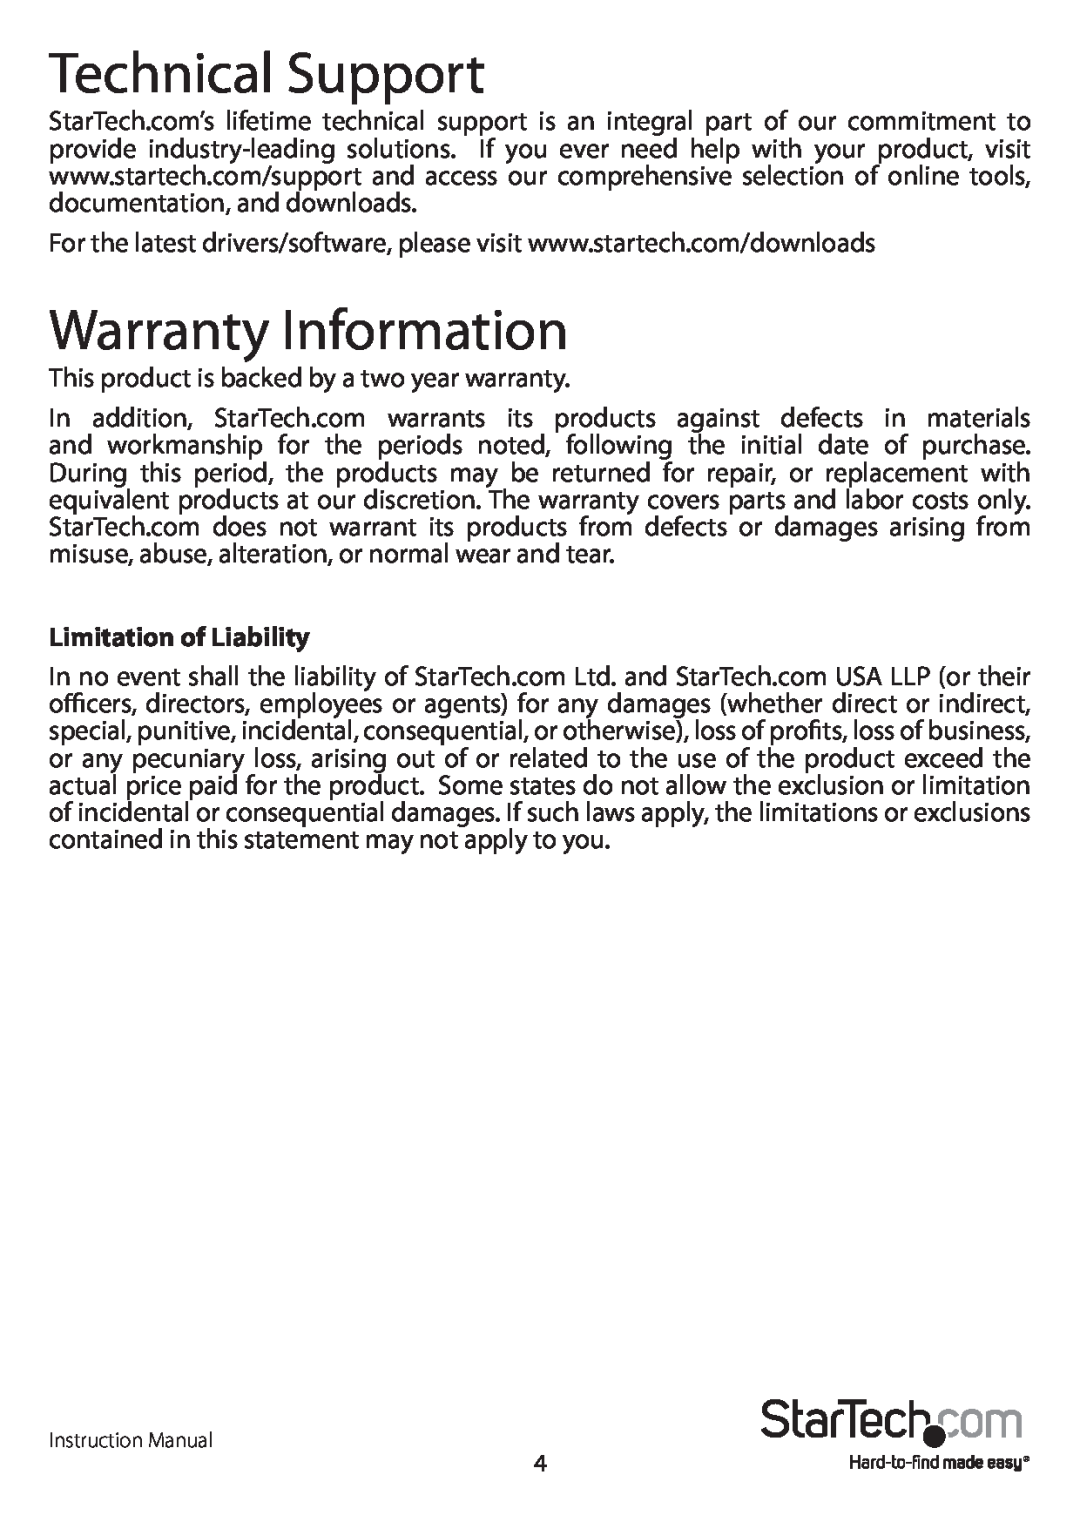 StarTech.com 1394 manual Technical Support, Warranty Information, Limitation of Liability 